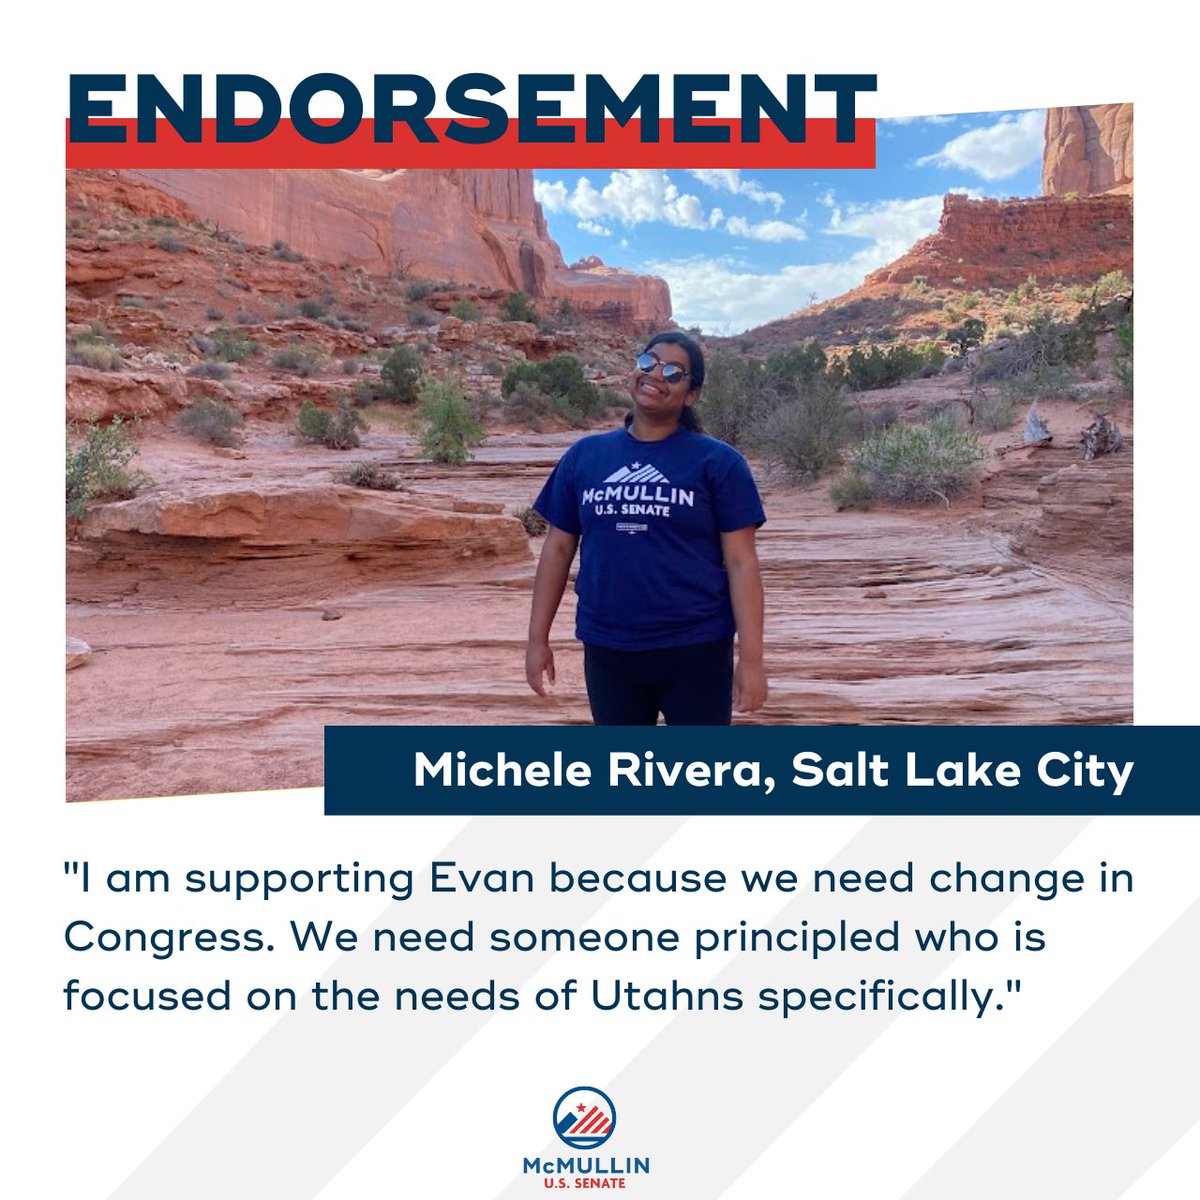 Thank you, Michele! Michele has been an incredible supporter and volunteer in the Salt Lake City area. I'm so grateful for everyone on #TeamEvan who is working hard to get out the word about the upcoming election and the movement we're building here in Utah.